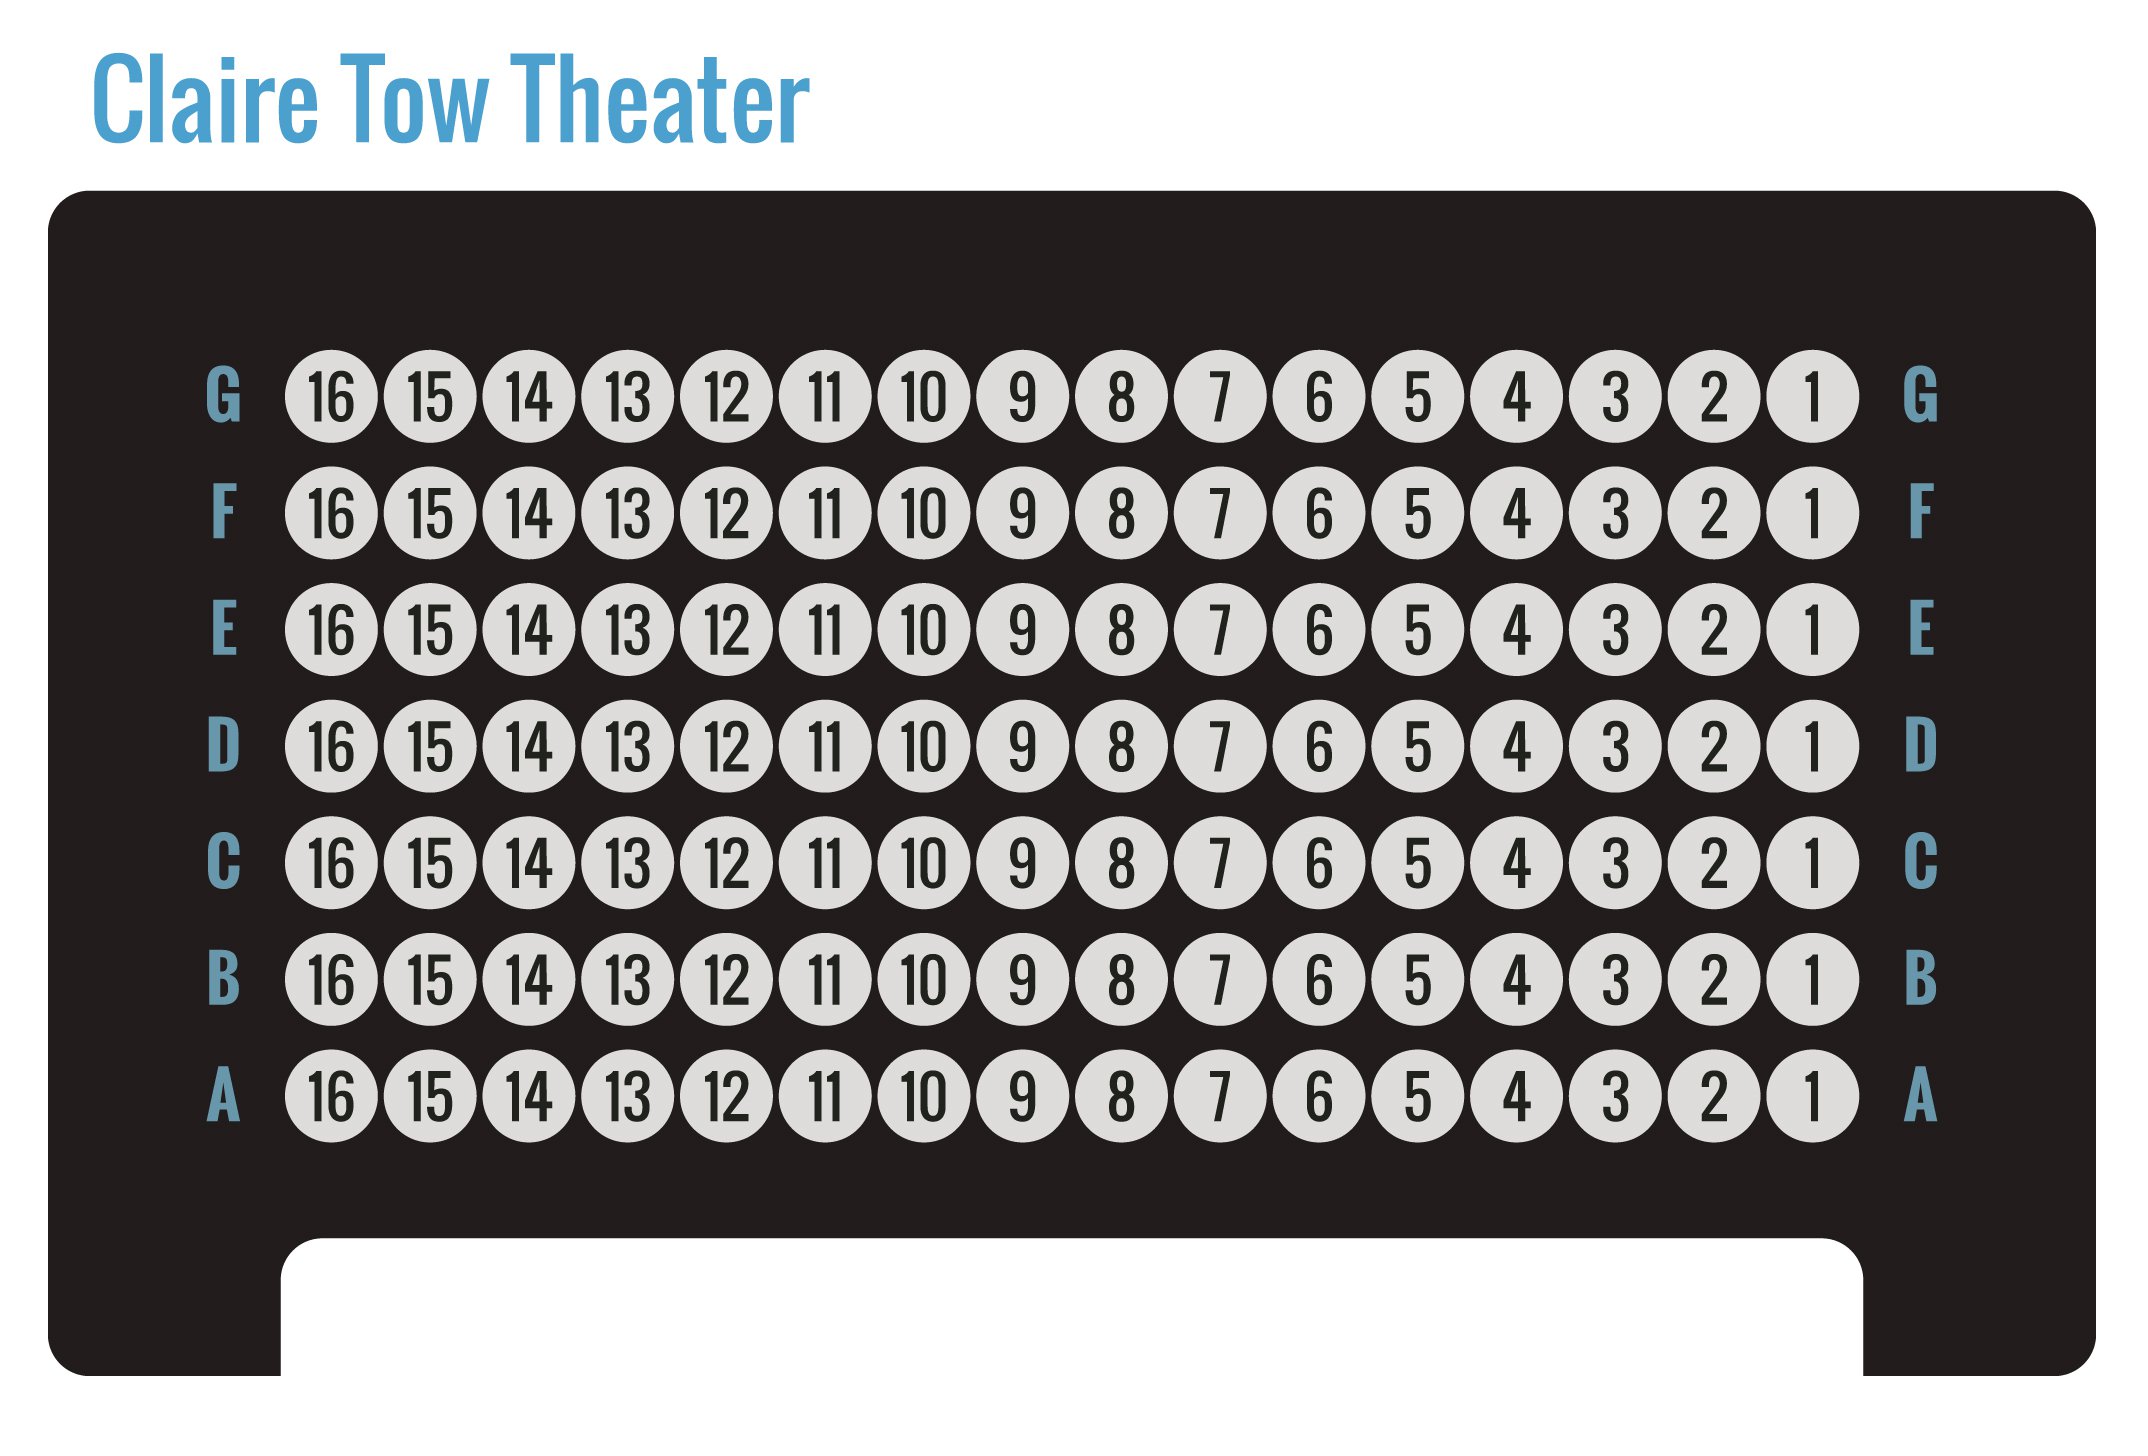 Claire Tow Theater General Seating Chart